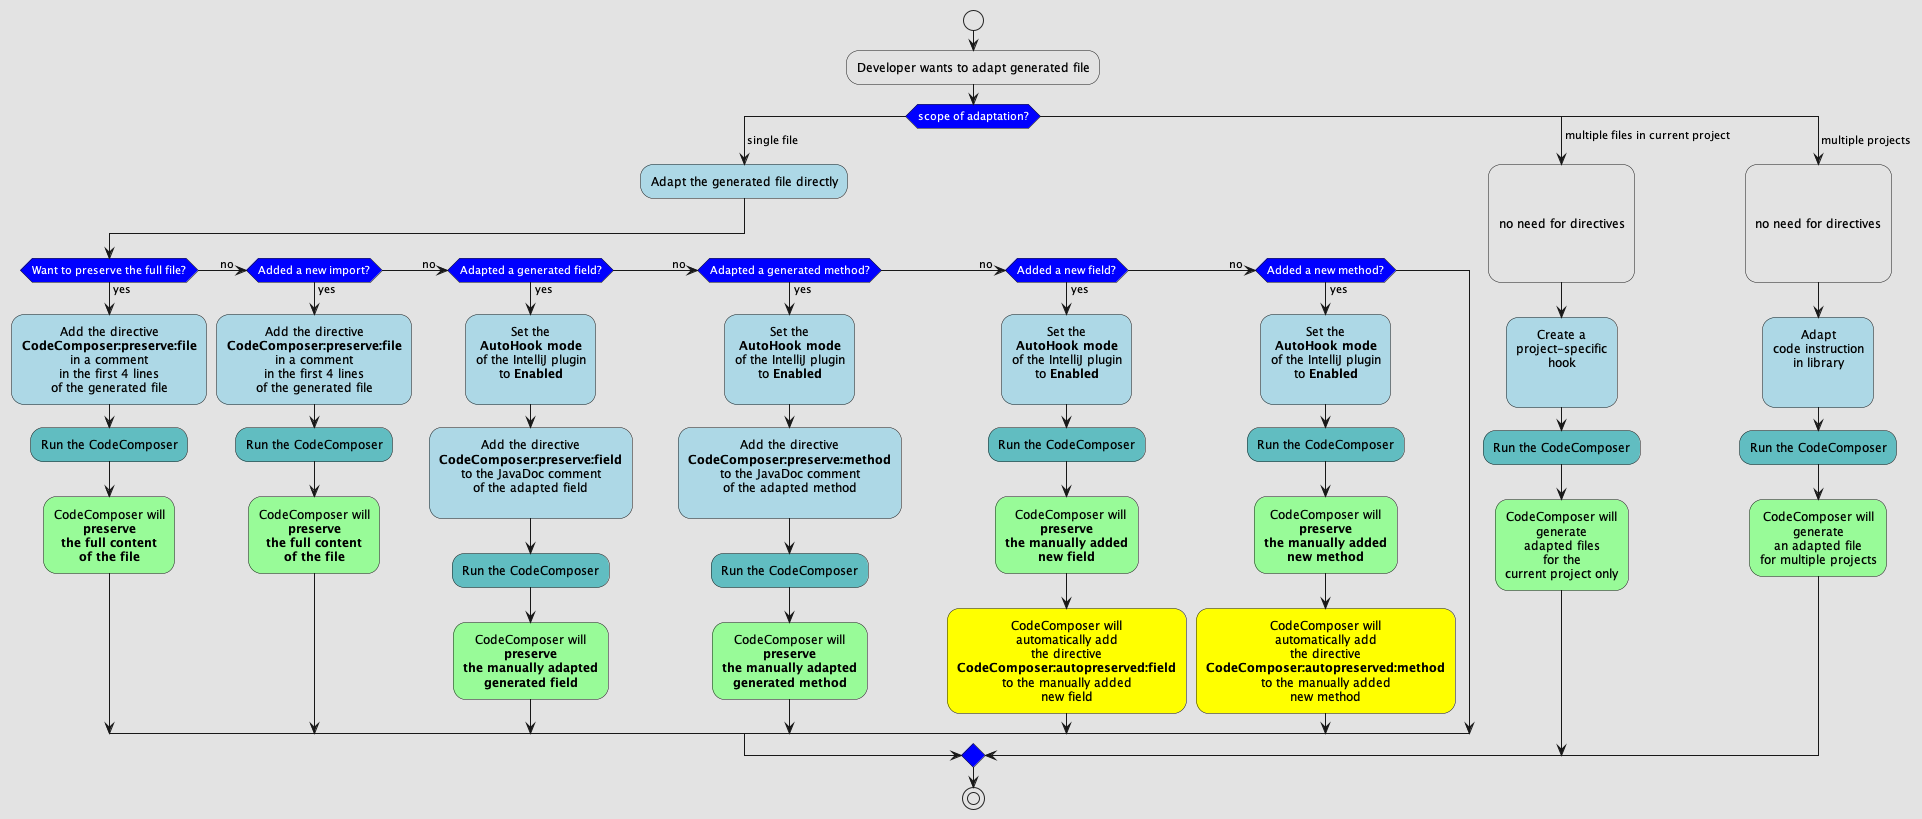 ../../_images/codecomposer-directives-activity-diagram.png